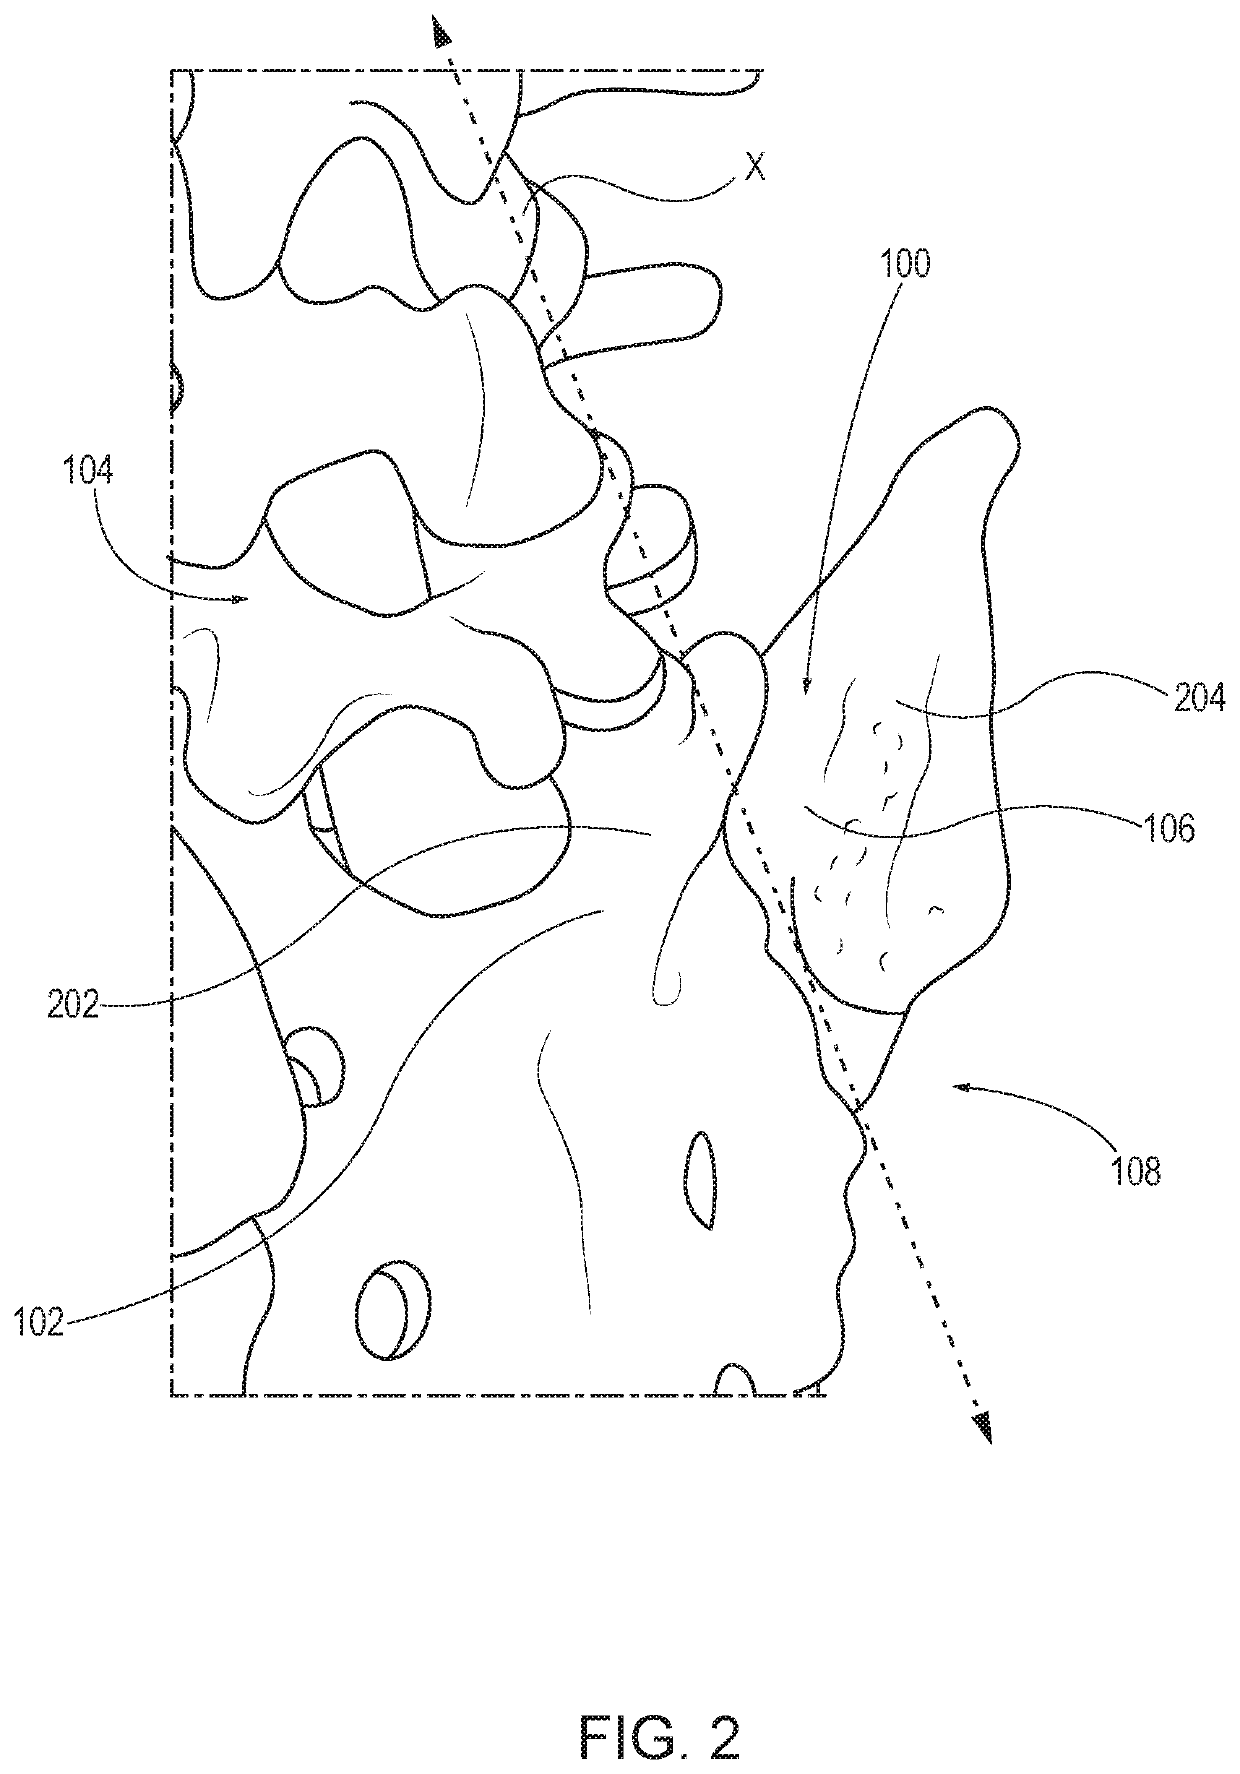 Sacroiliac joint fusion implants and methods